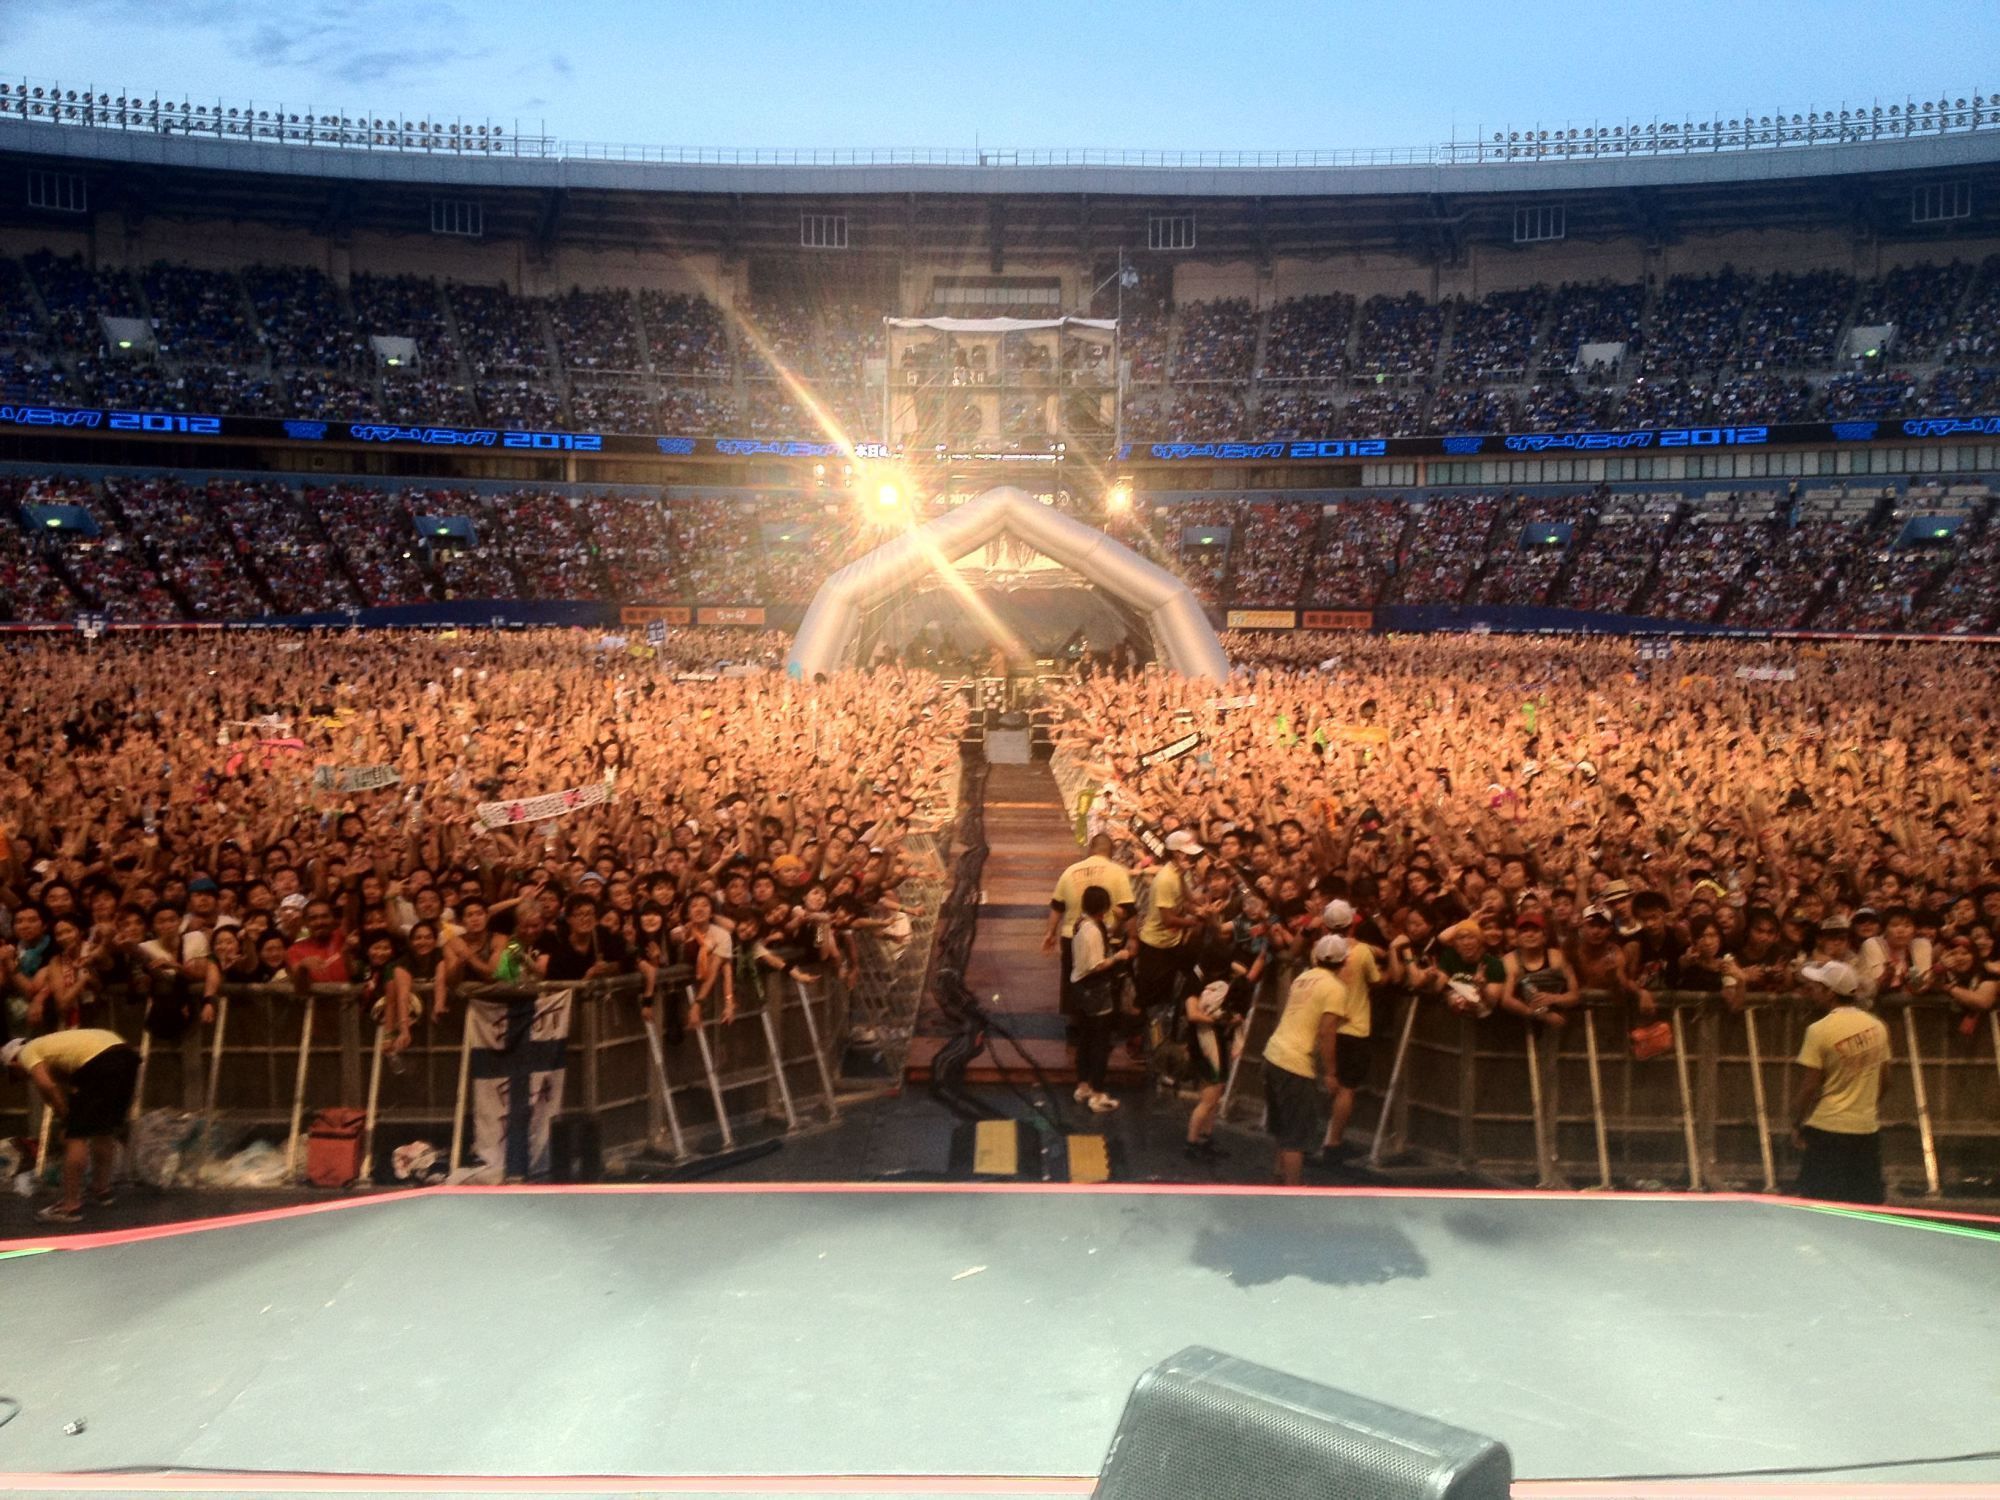 View From Stage. Concert crowd, Dream concert, Concert